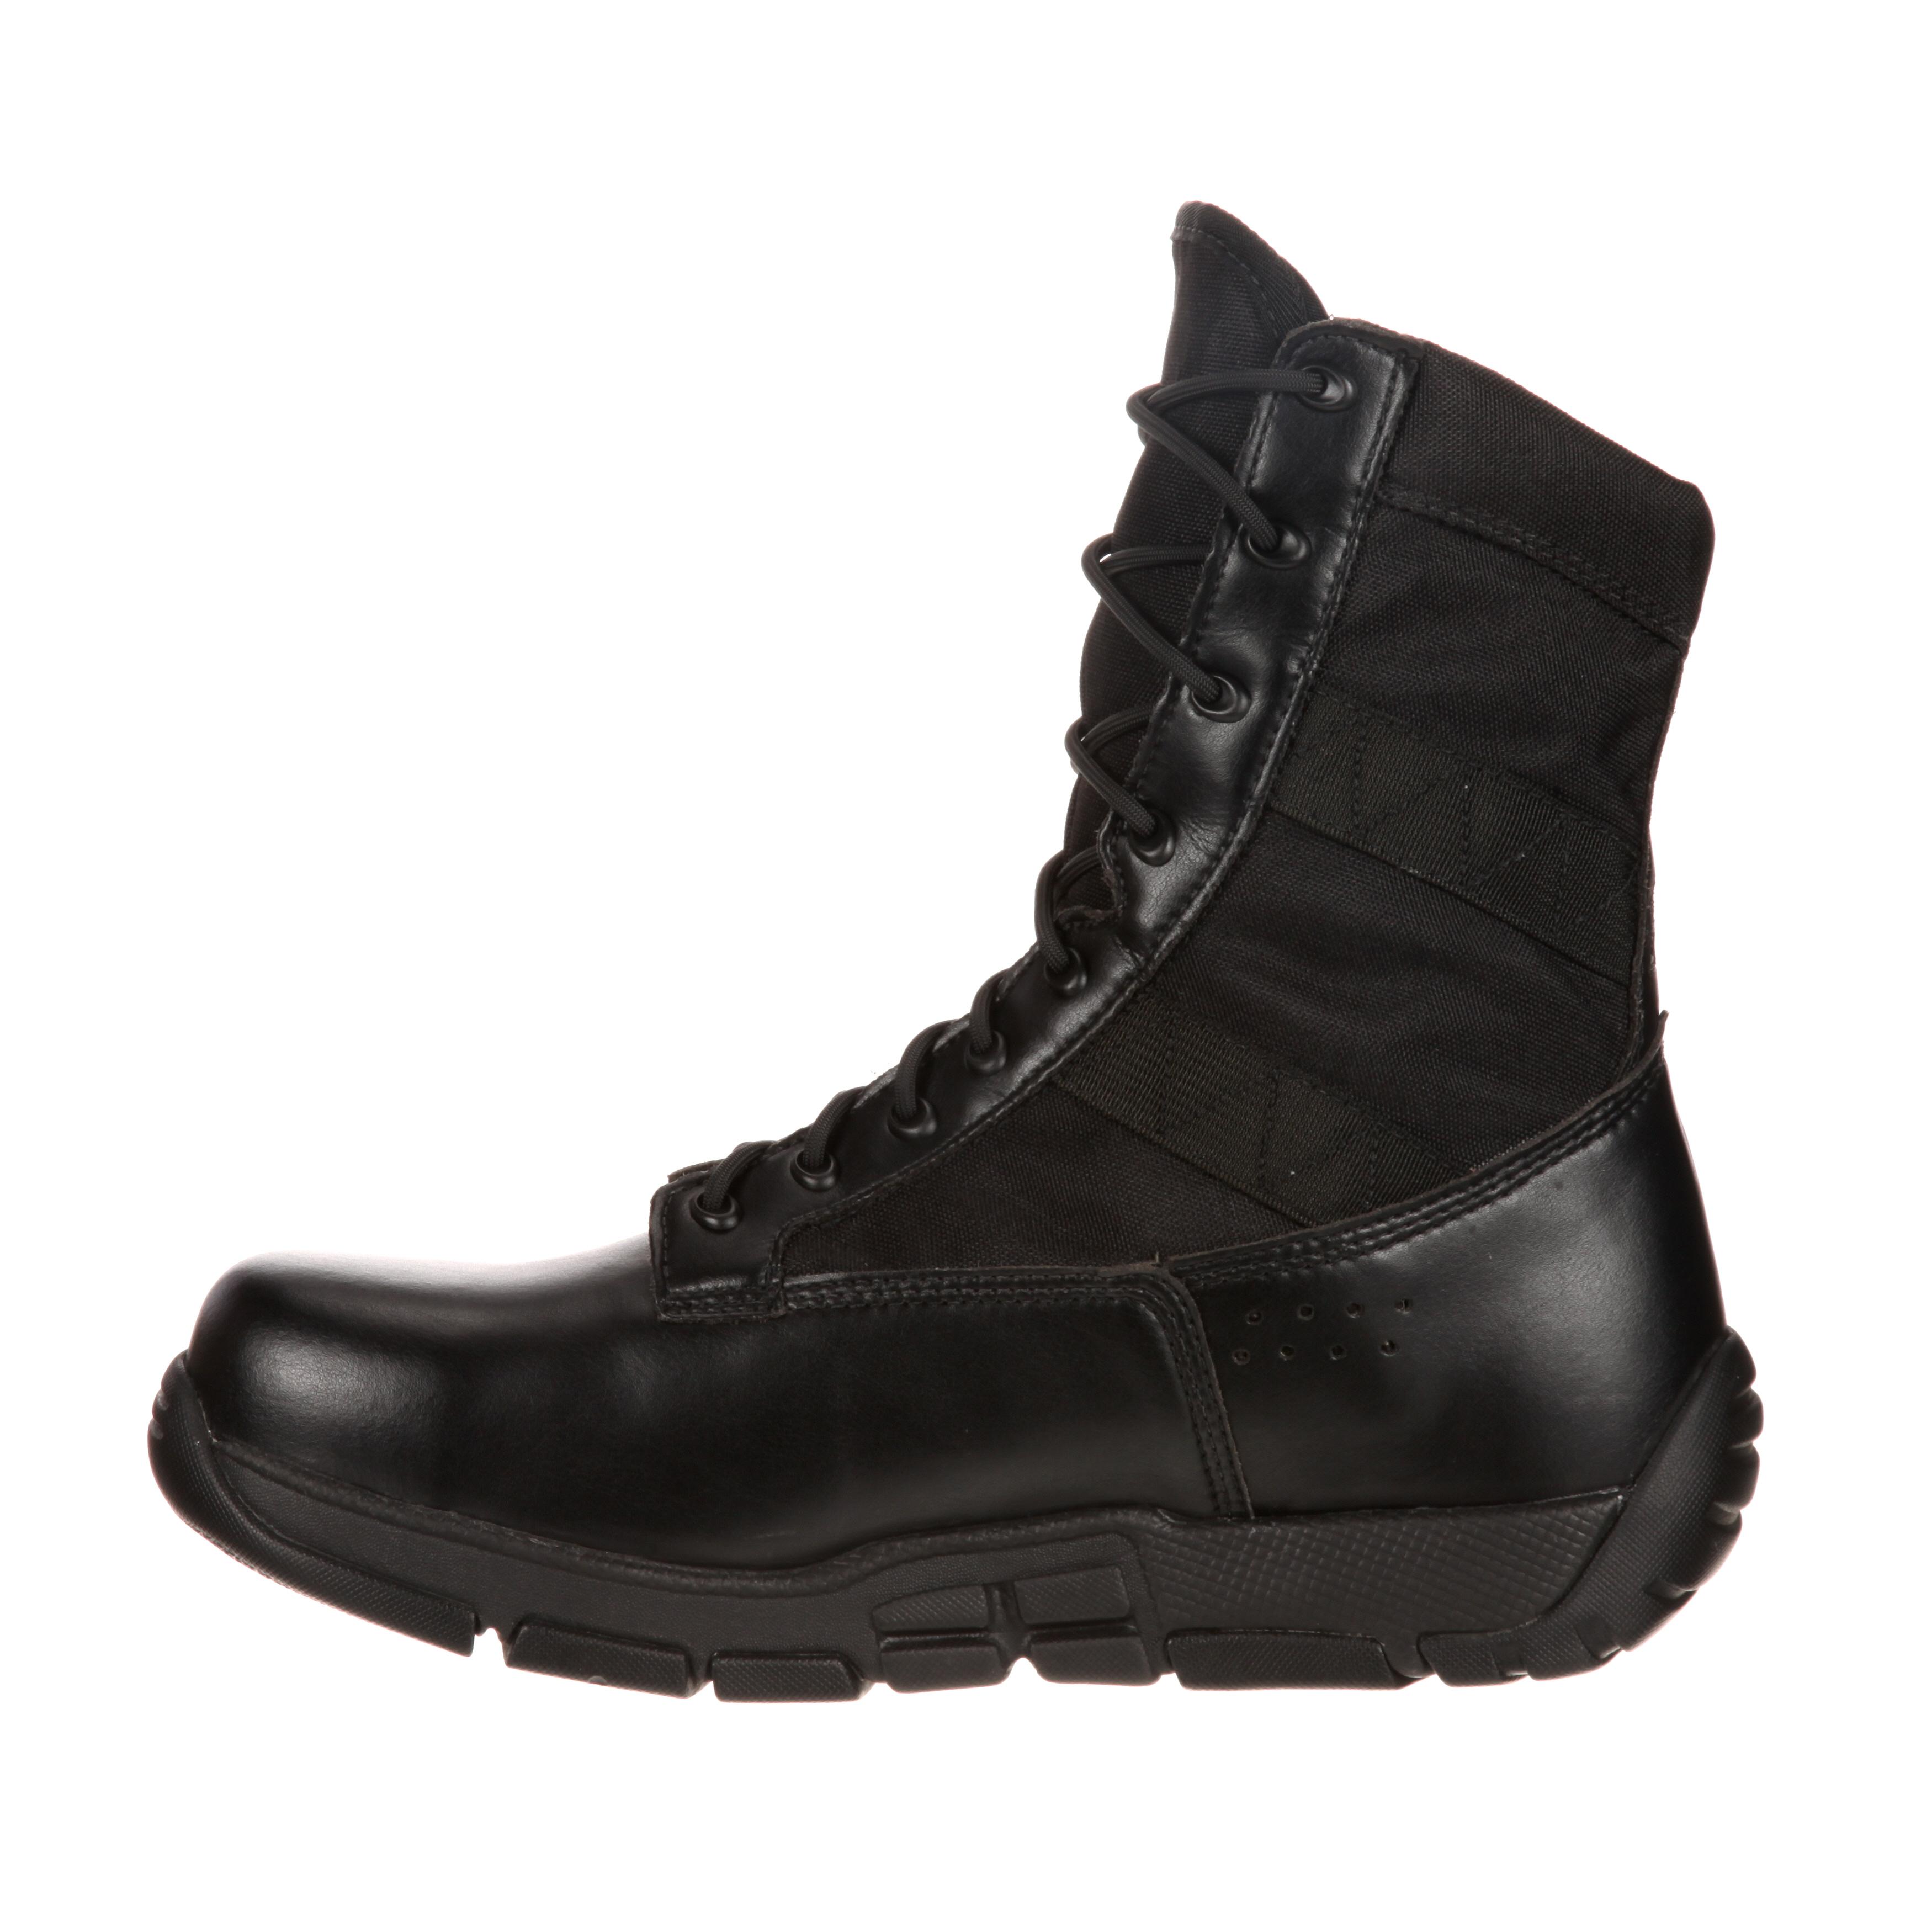 Rocky C4T Composite Toe Duty Boots, #RKYD020